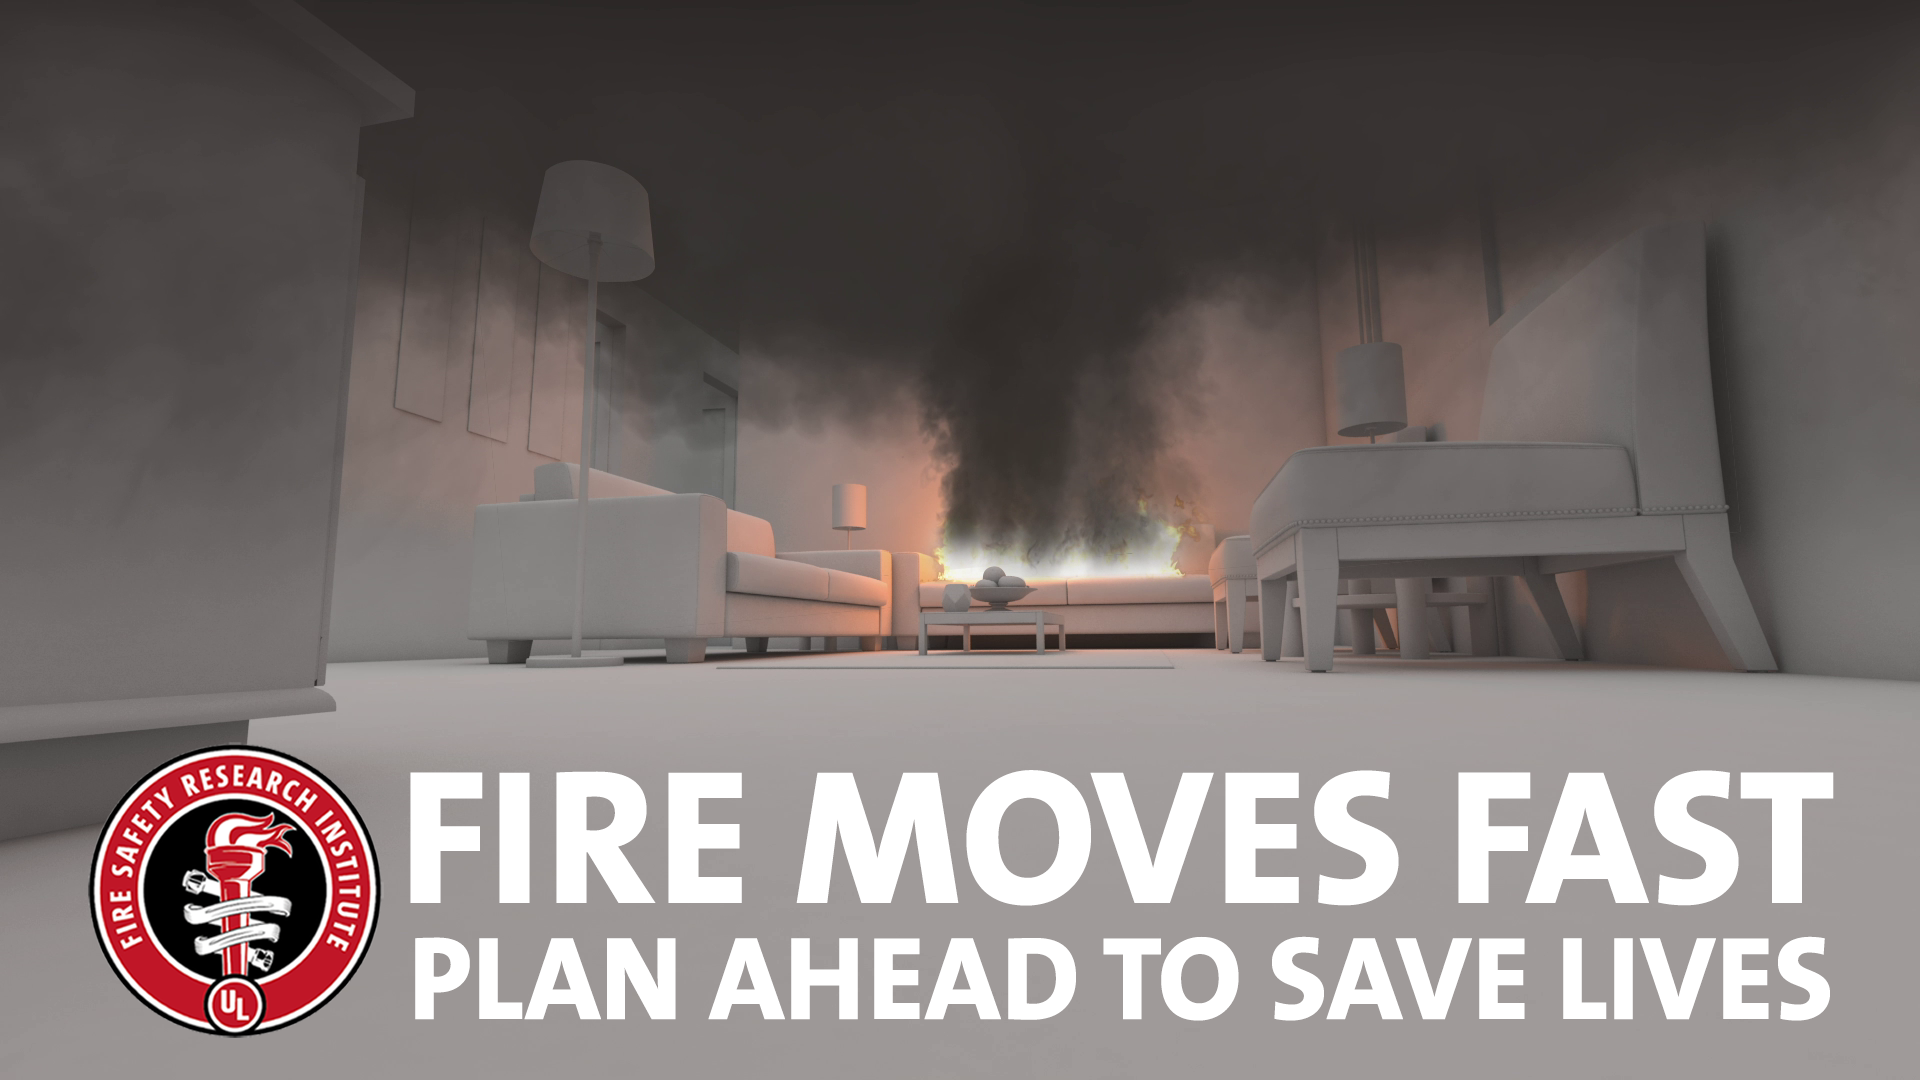 Fire moves fast. Plan ahead to save lives.